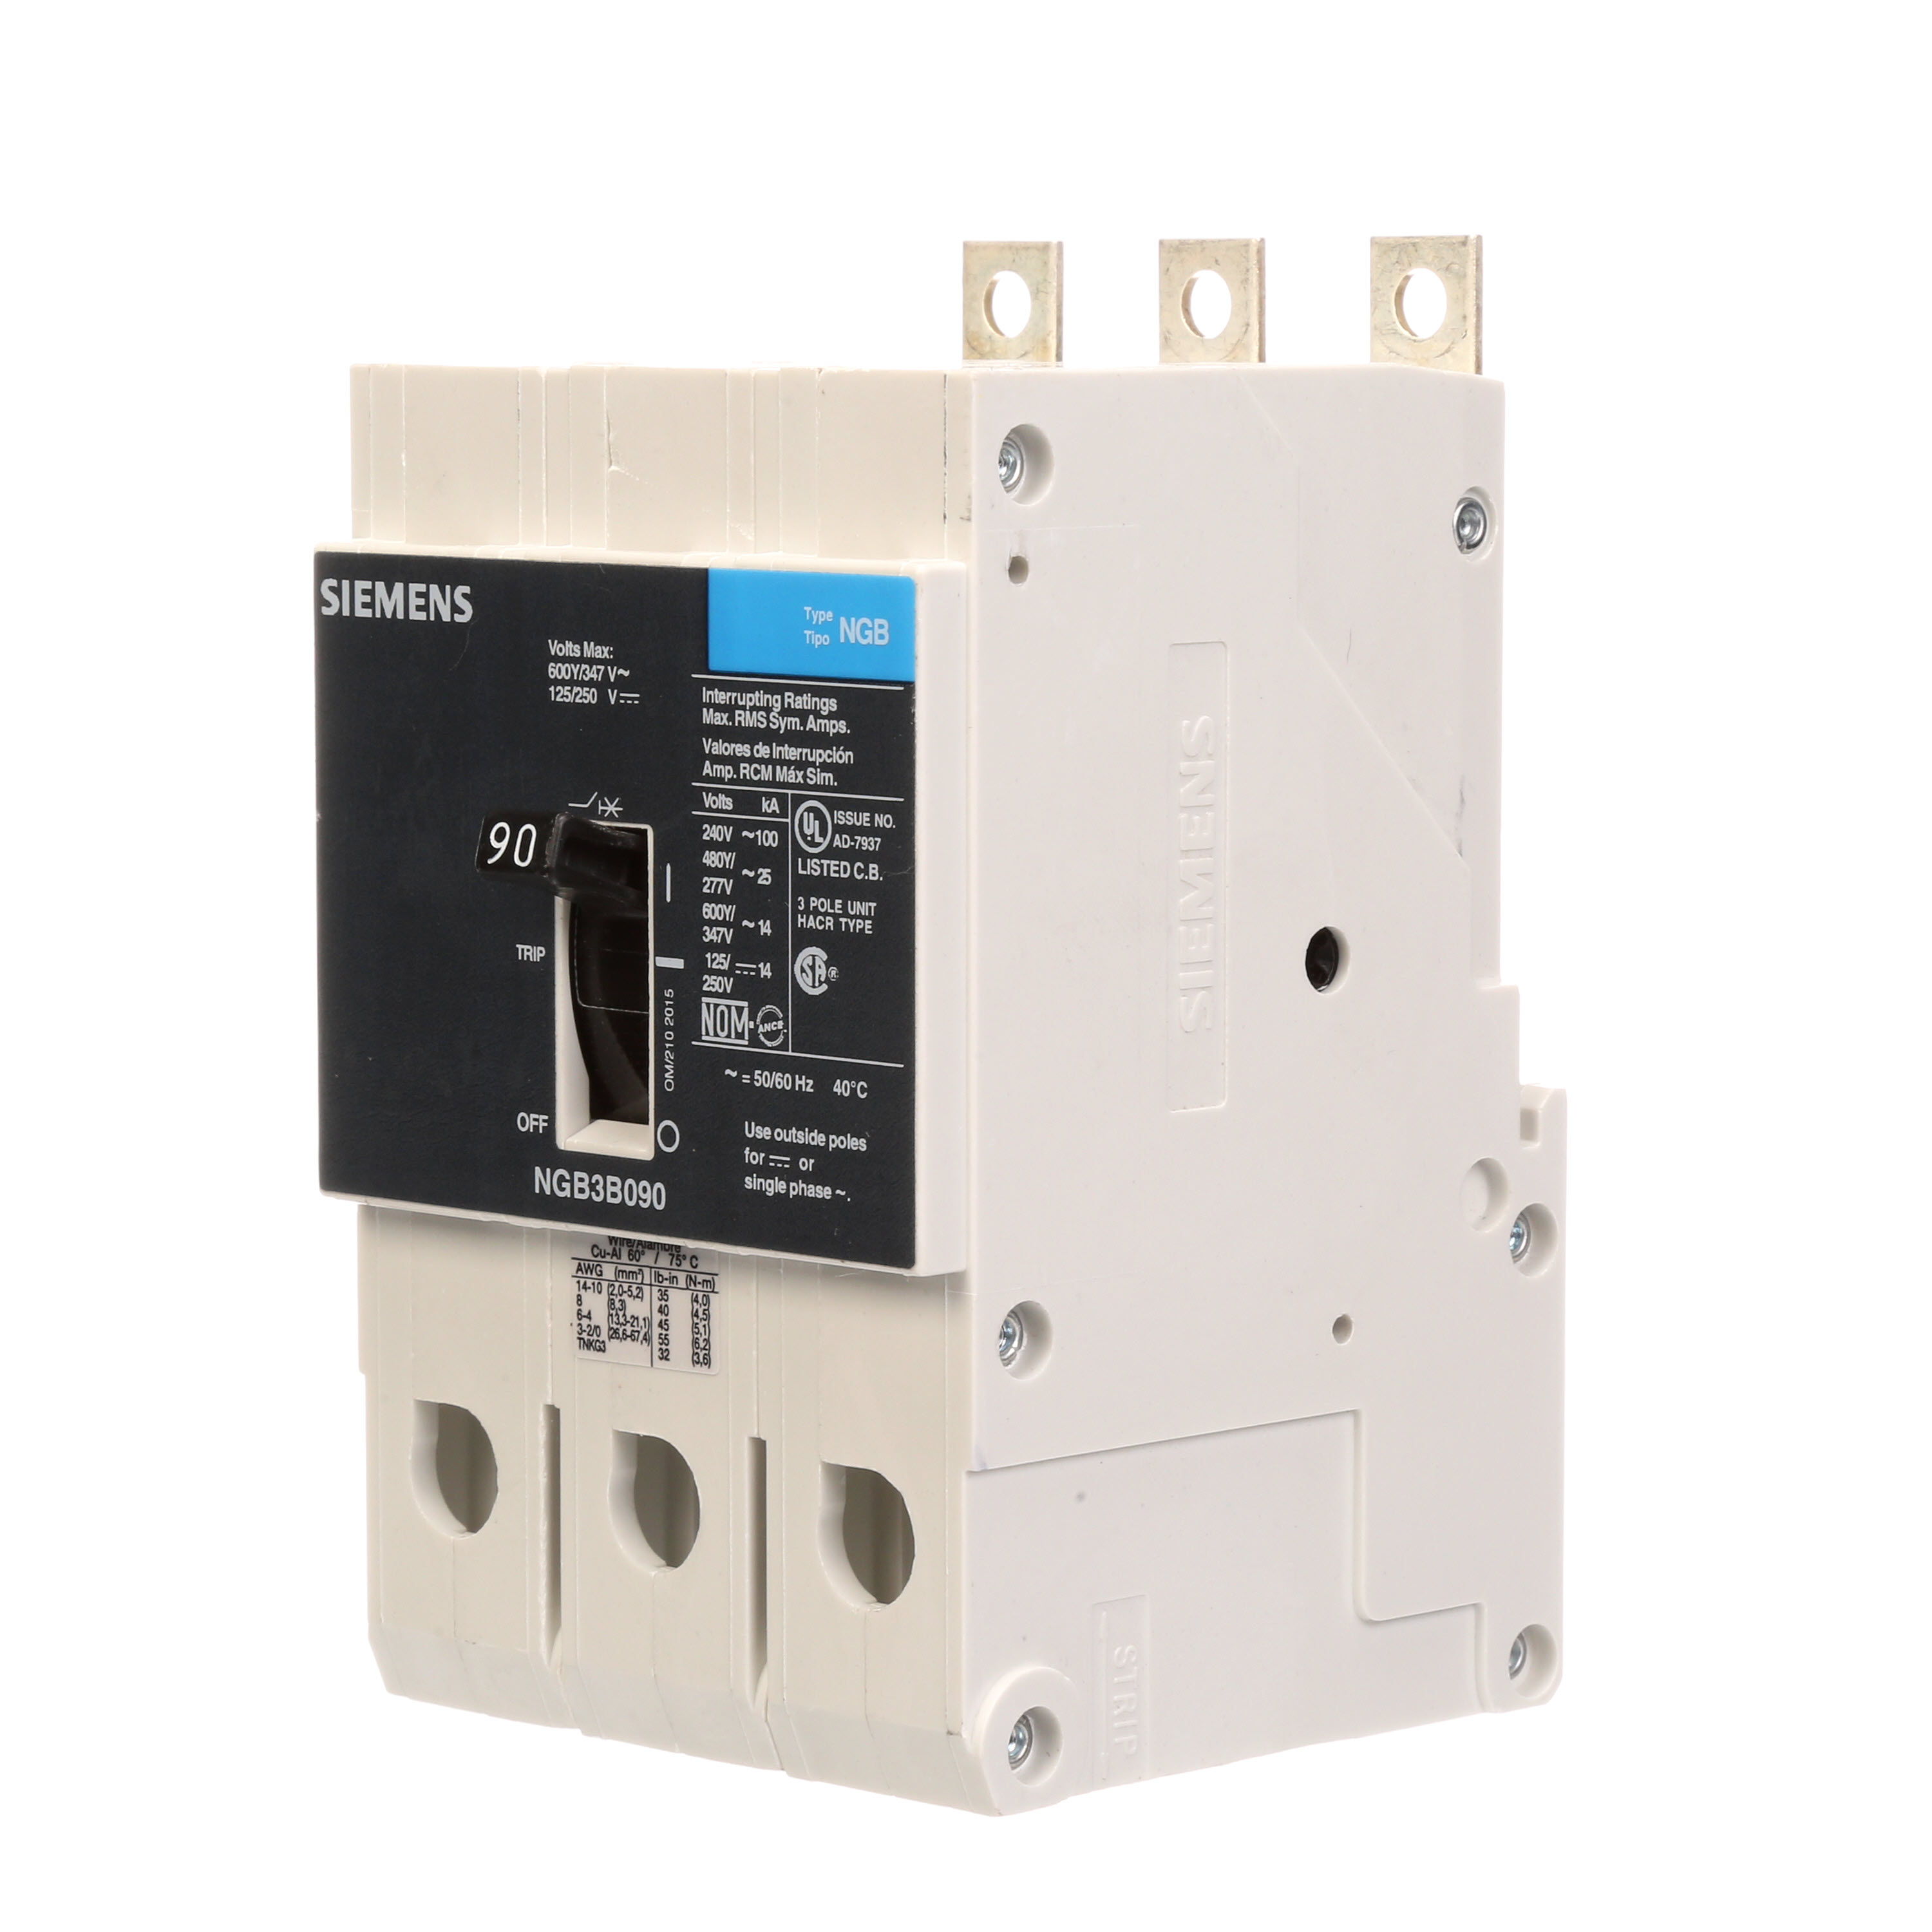 SIEMENS LOW VOLTAGE PANELBOARD MOUNT G FRAME CIRCUIT BREAKER WITH THERMAL - MAGNETIC TRIP. UL LISTED NGB FRAME WITH STANDARD BREAKING CAPACITY. 90A 3-POLE (14KAIC AT 600Y/347V) (25KAIC AT 480Y/277V). SPECIAL FEATURES MOUNTS ON PANELBOARD, NO LUGS, VALUE PACK. DIMENSIONS (W x H x D) IN 3 x 5.4 x 2.8.